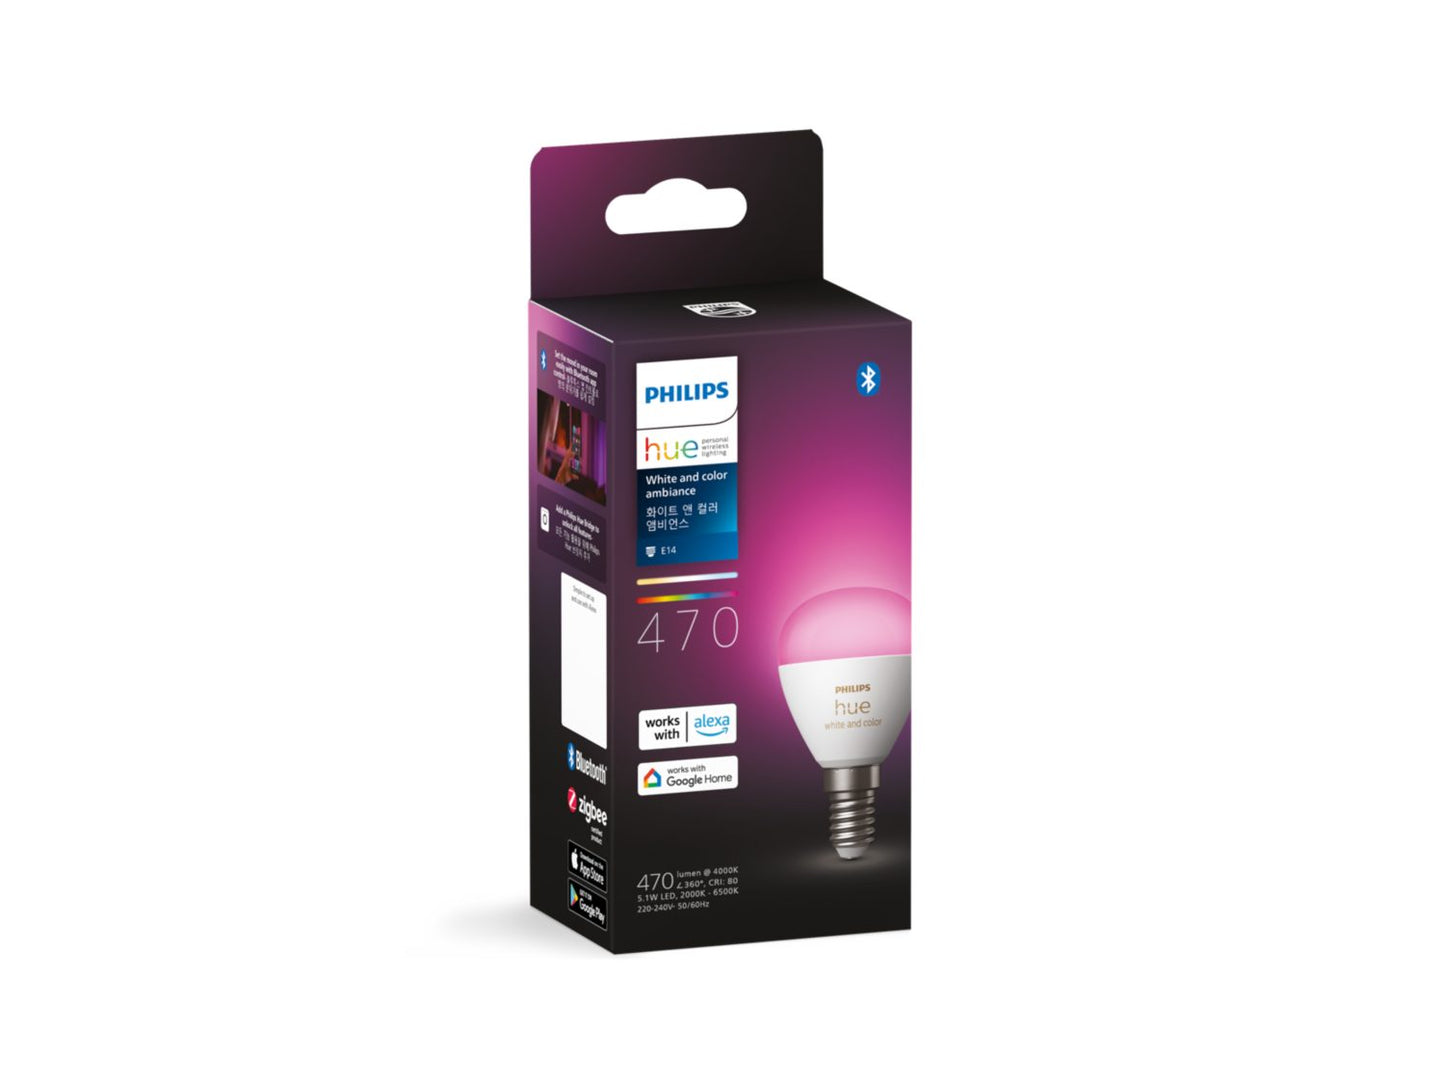 Philips Hue E14 Luster Candle Globe - Colour in box